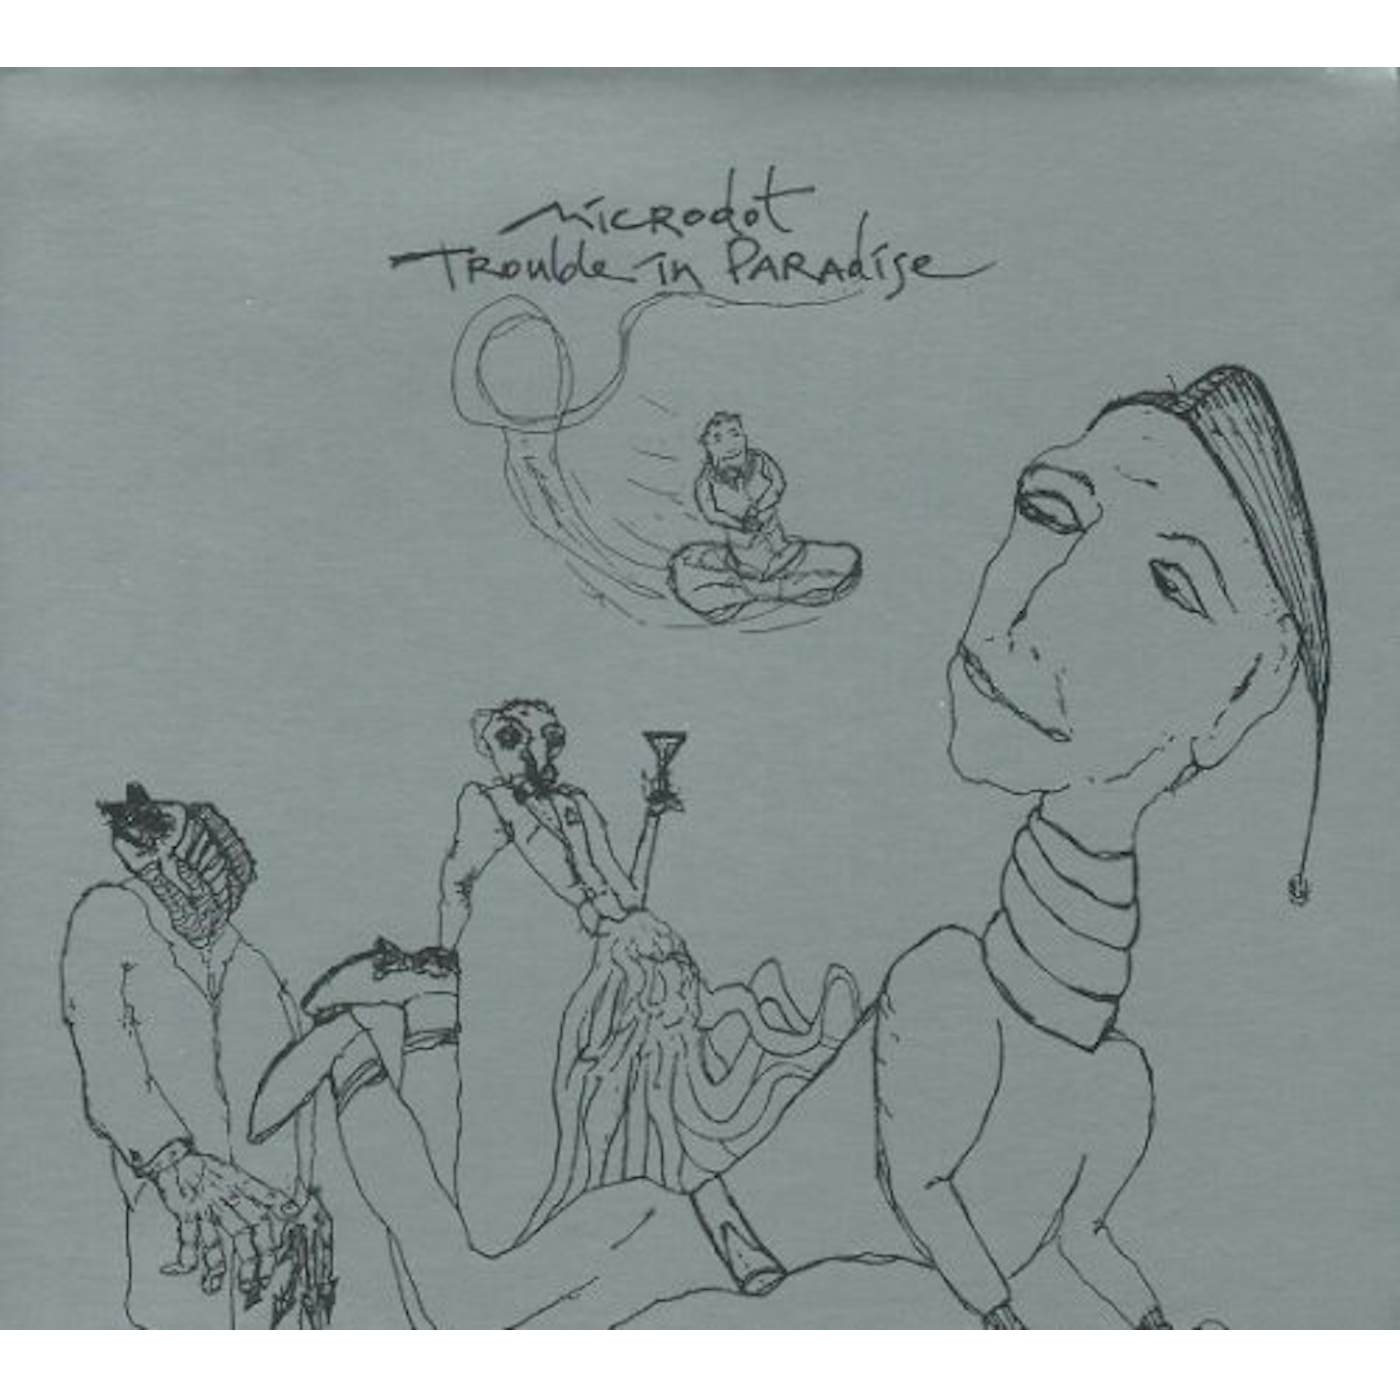 Microdot TROUBLE IN PARADISE CD